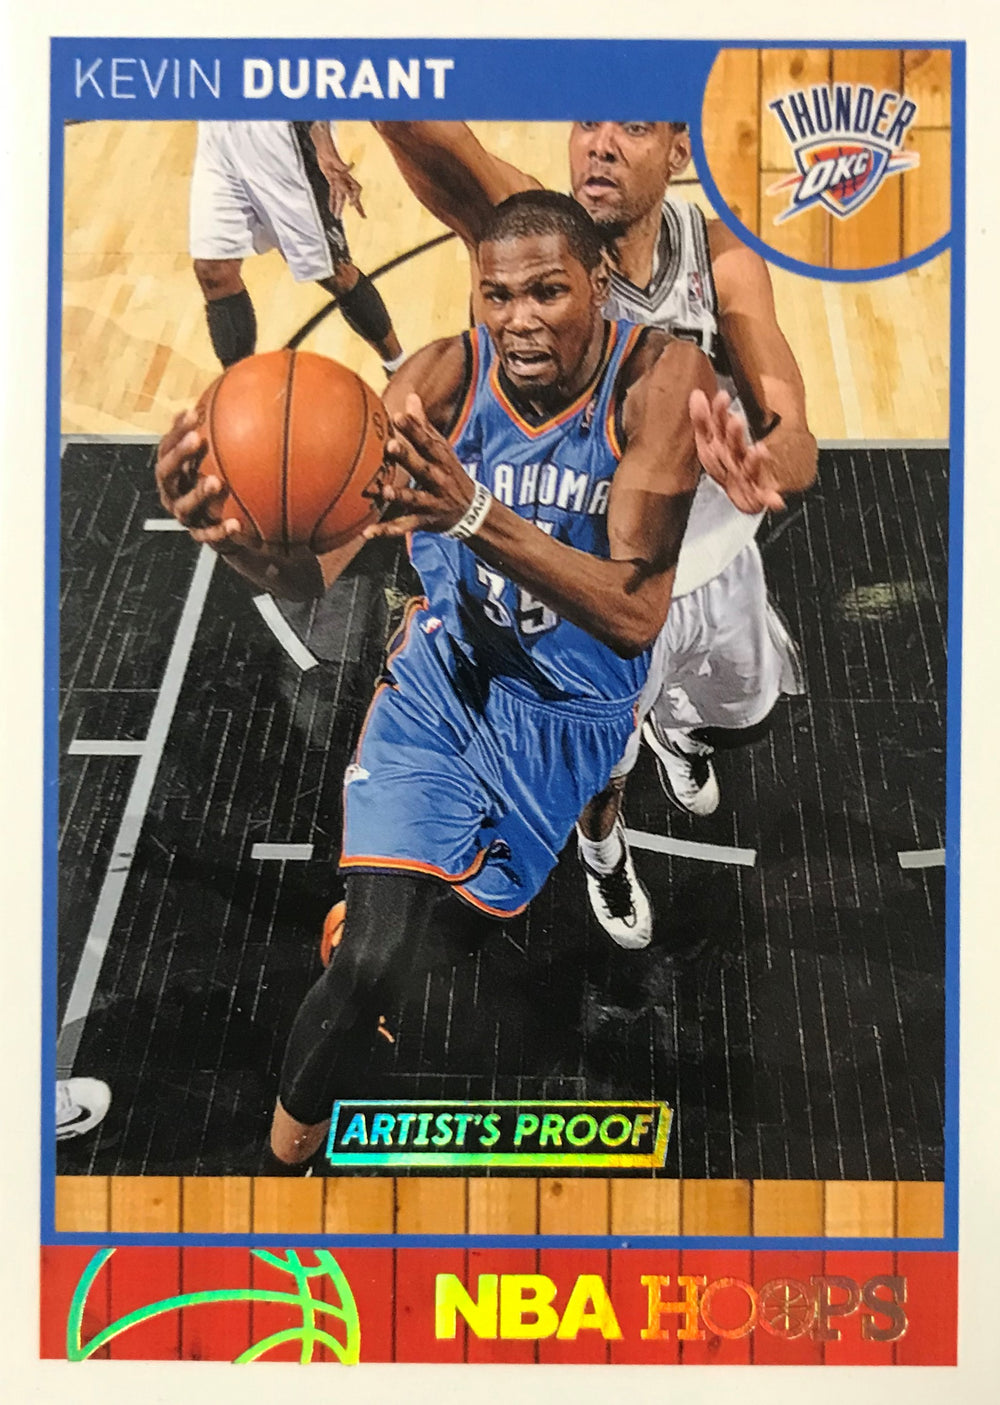 Kevin Durant 2013 2014 Hoops ARTIST PROOF Series Mint Card #73